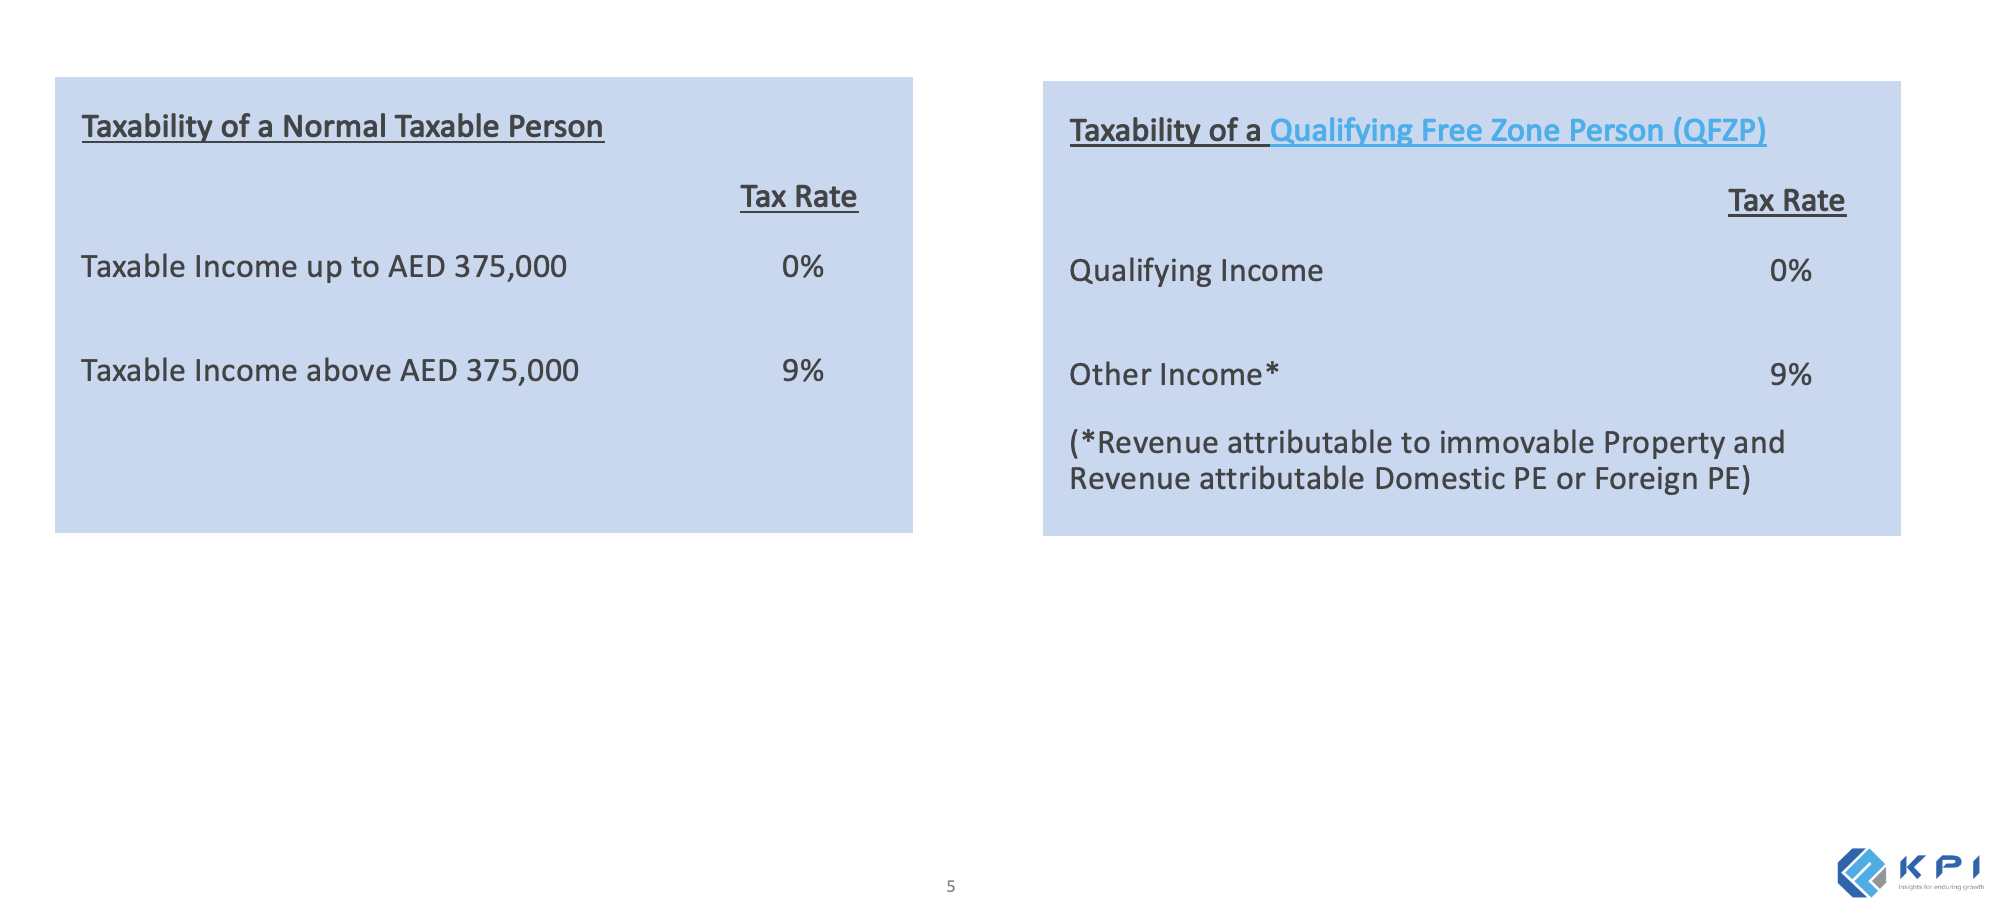 UAE Corporate Tax Rates Applicable to Normal Taxable Person vs Qualifying Free Zone Person